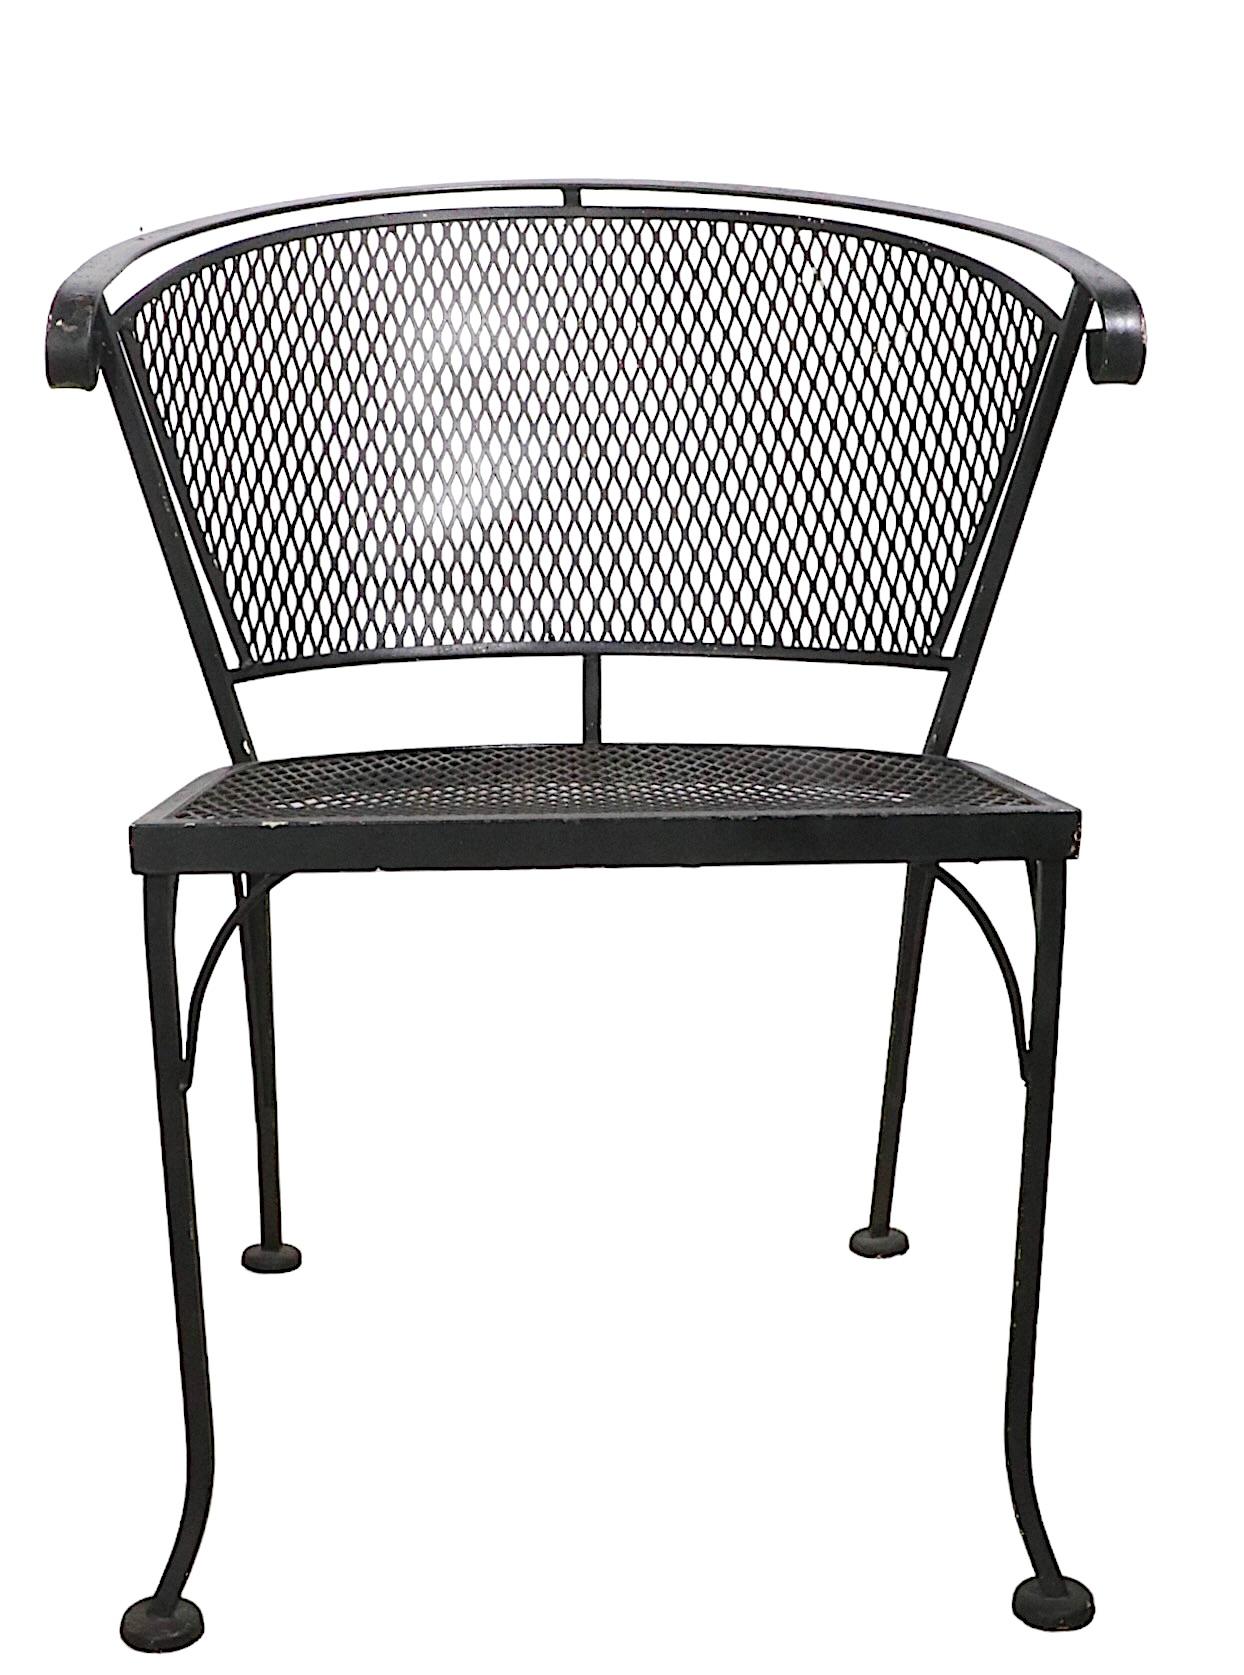 20th Century Pr Vintage  Woodard Garden Patio Poolside Chairs in Wrought Iron and Metal Mesh 